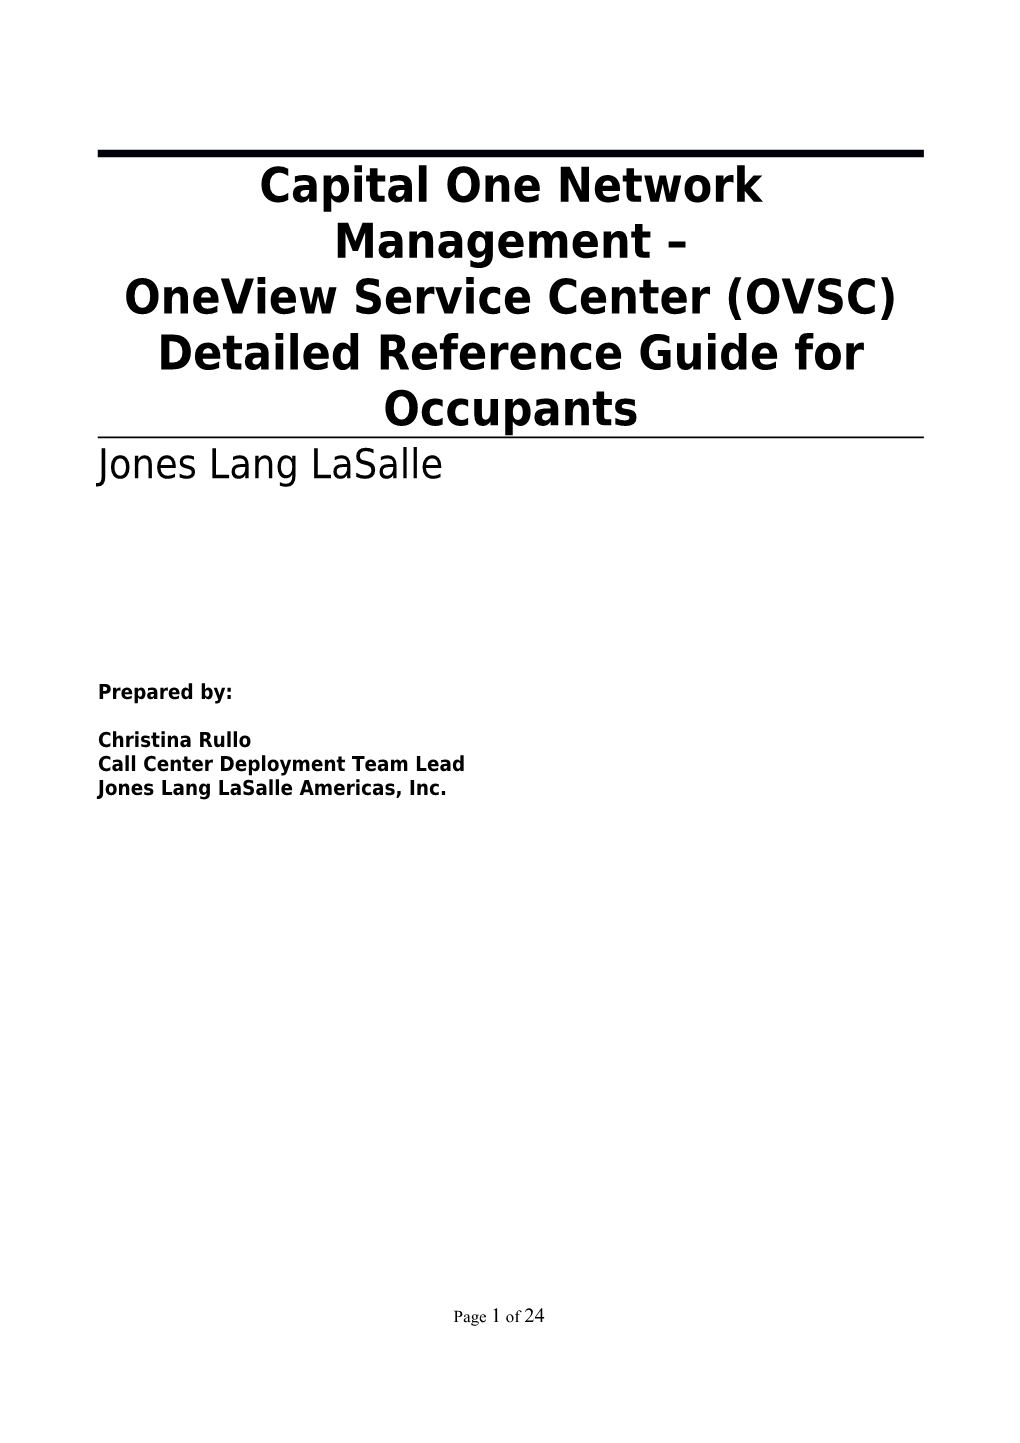 Generic OVSC 2013 - Detailed Reference Guide